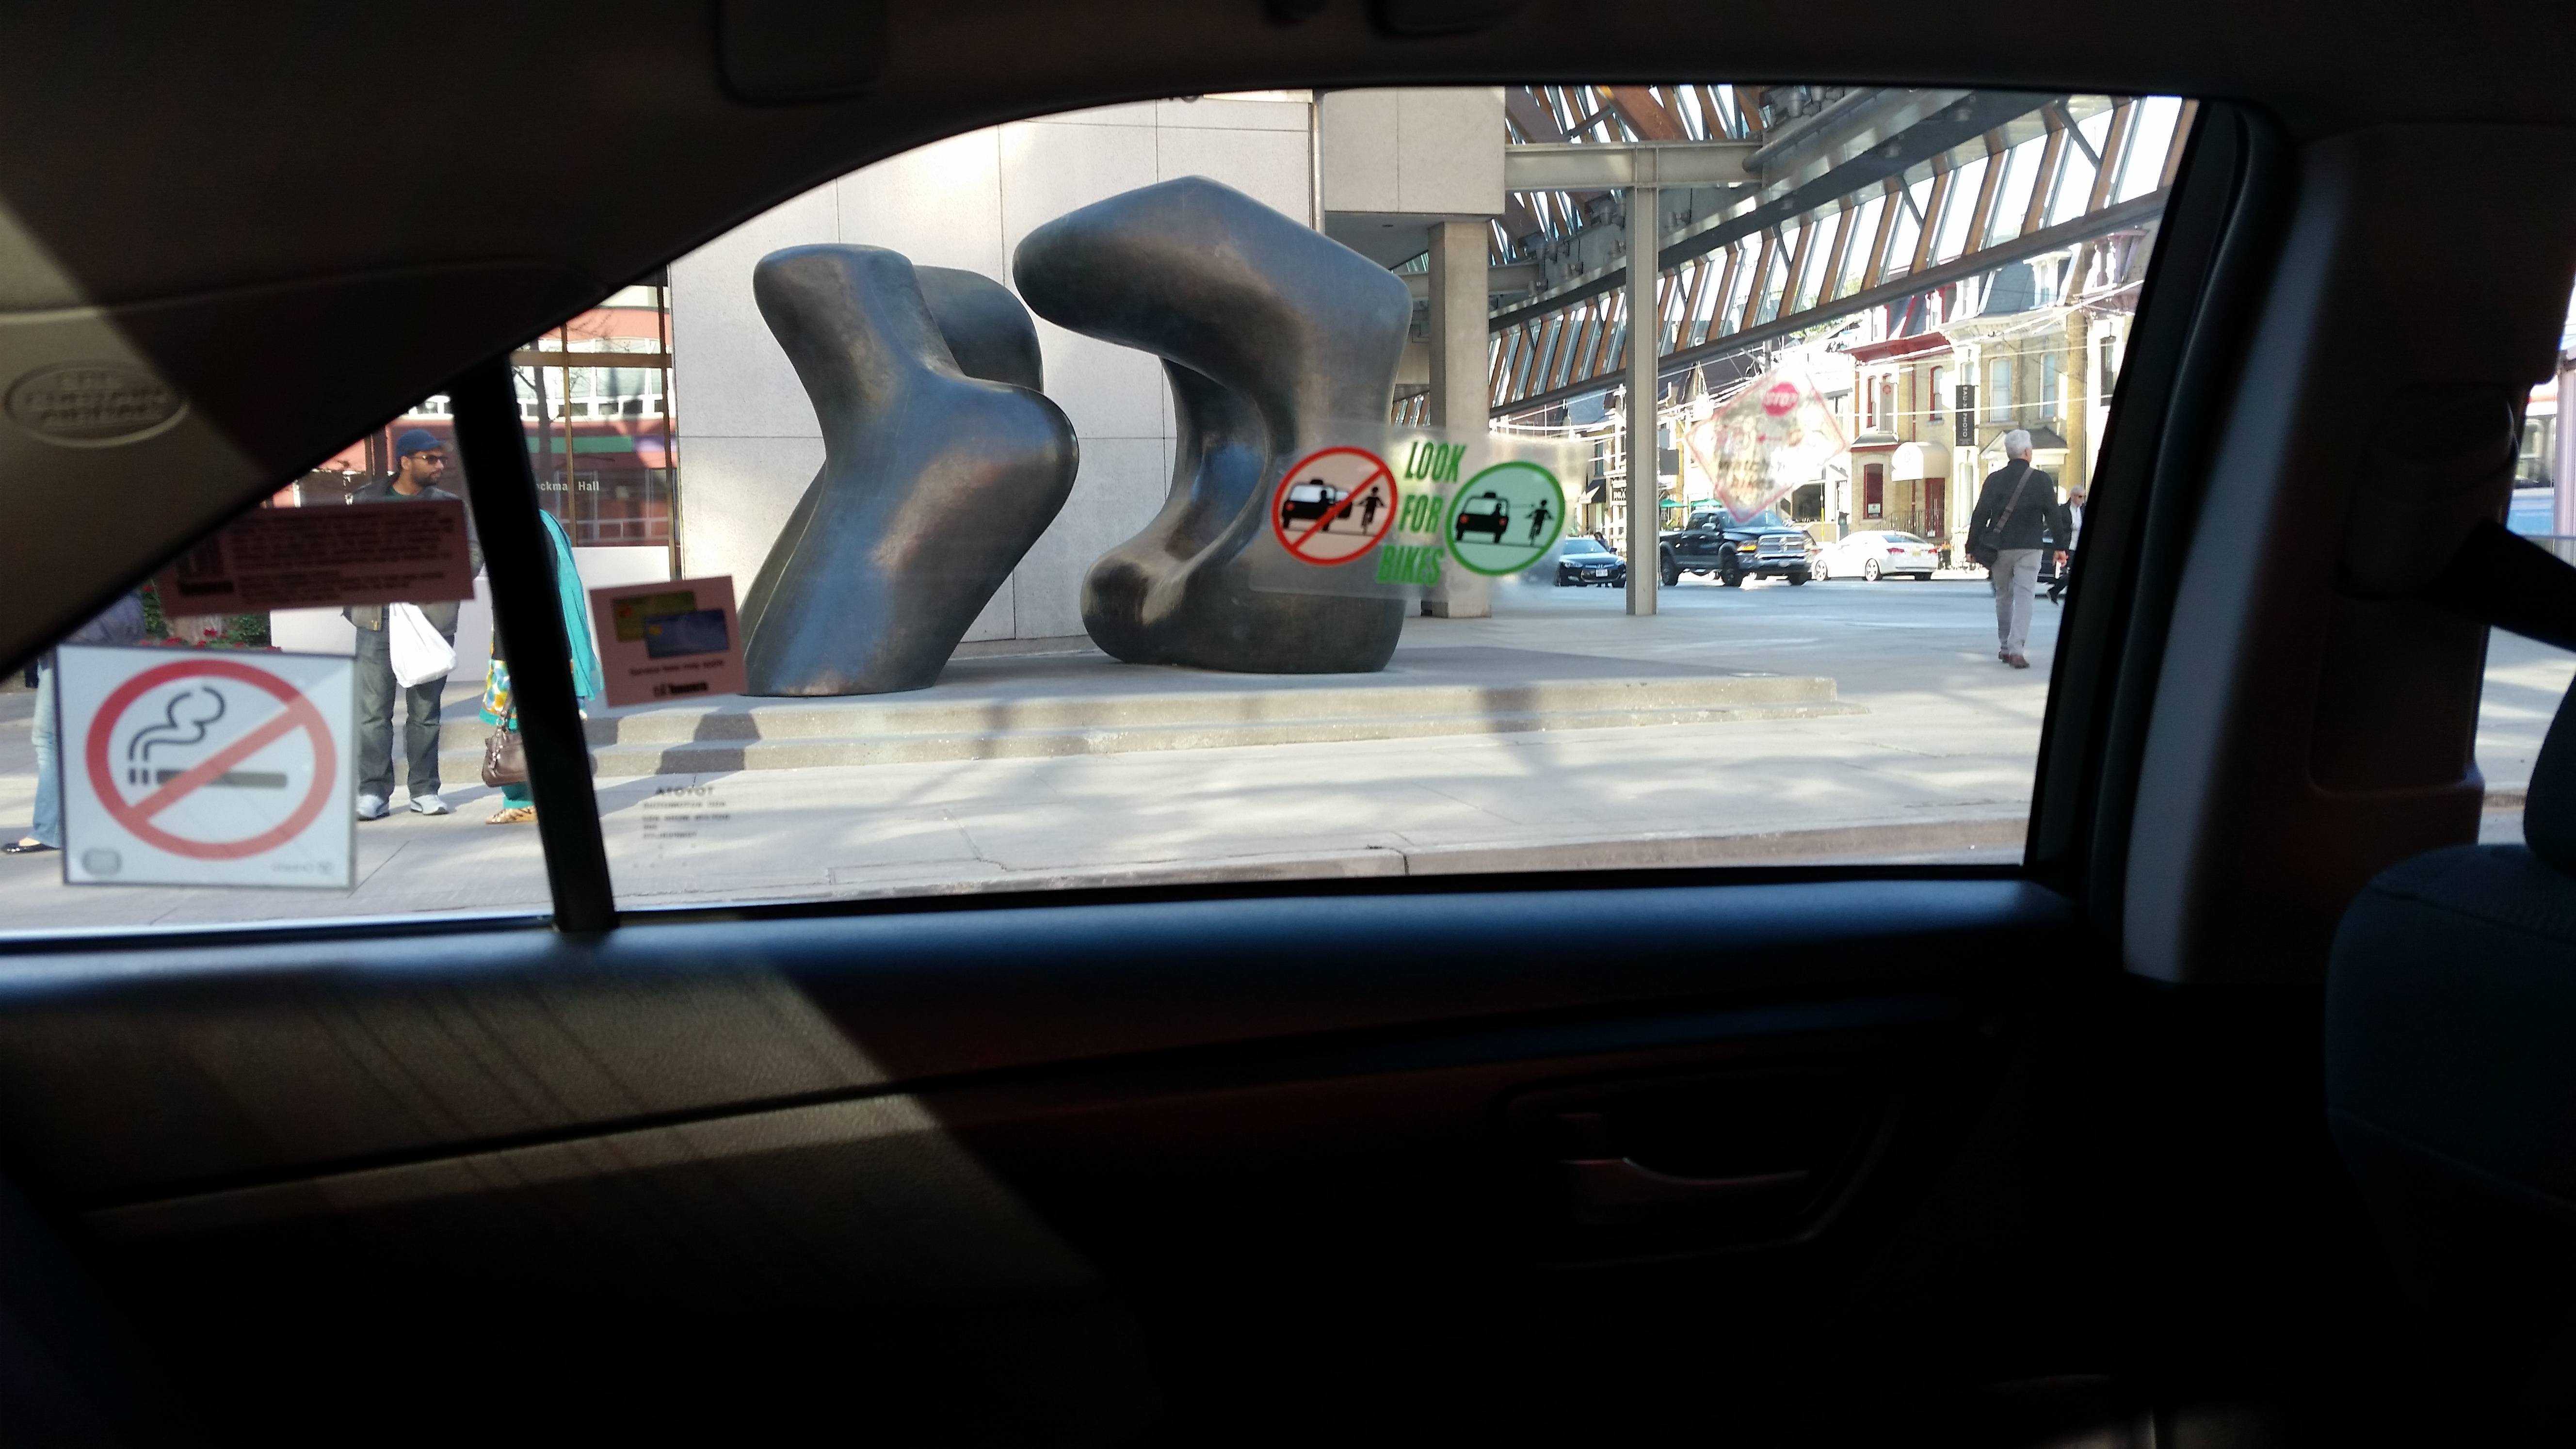 A view of the boulder statues from inside the cab on my way to RMH